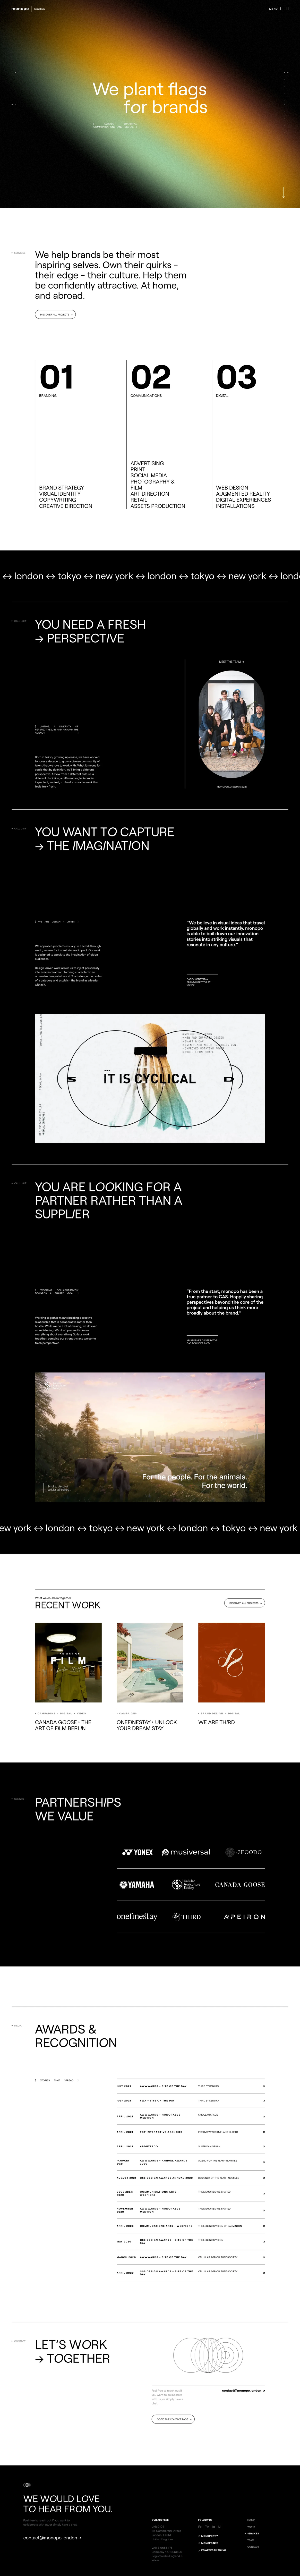 monopo london Landing Page Example: We are a Tokyo-born design-driven creative agency working accross branding, digital design and communications.